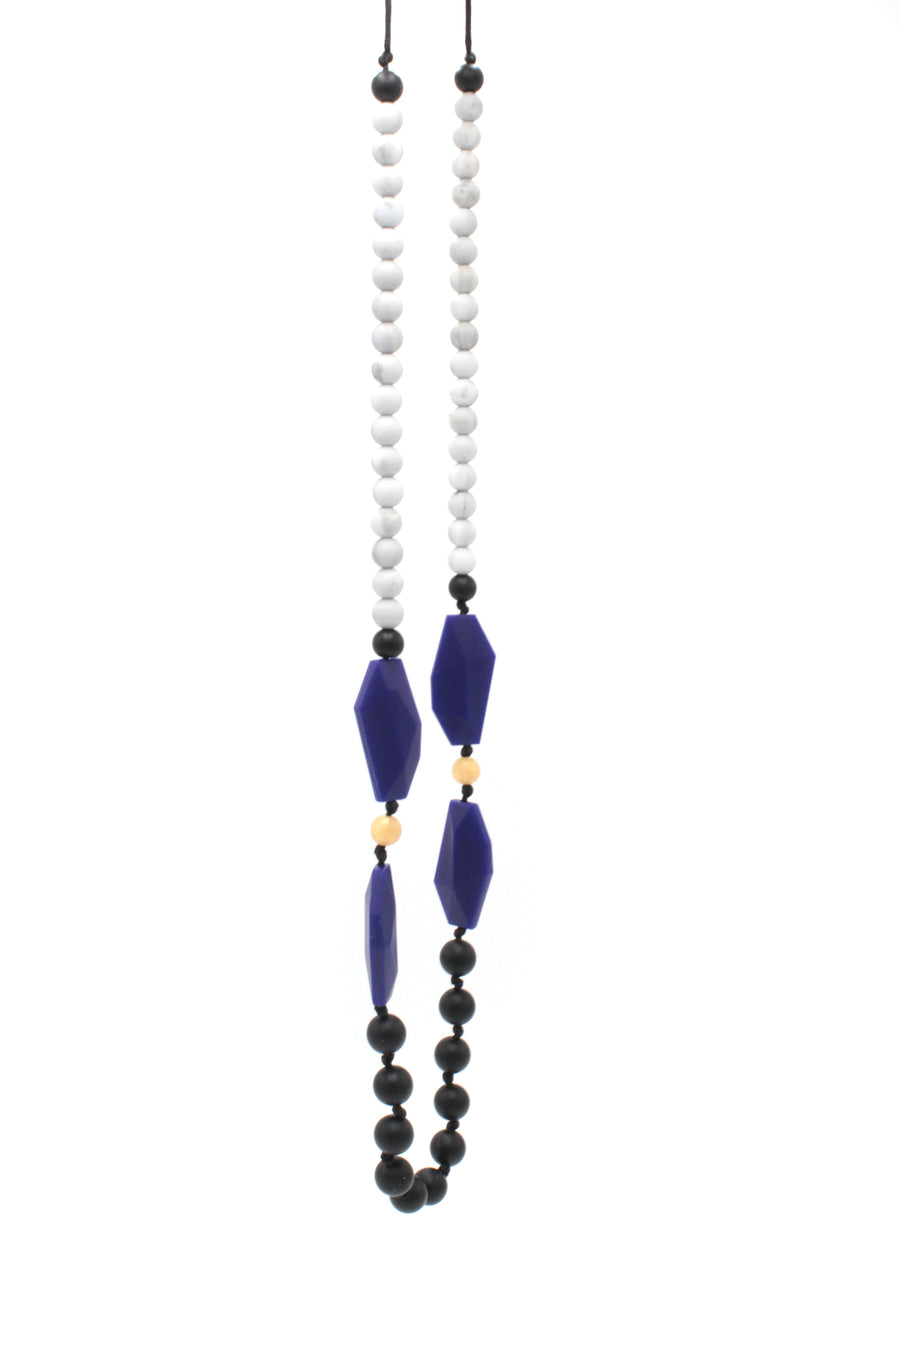 Nicolette Mama Necklace in Navy